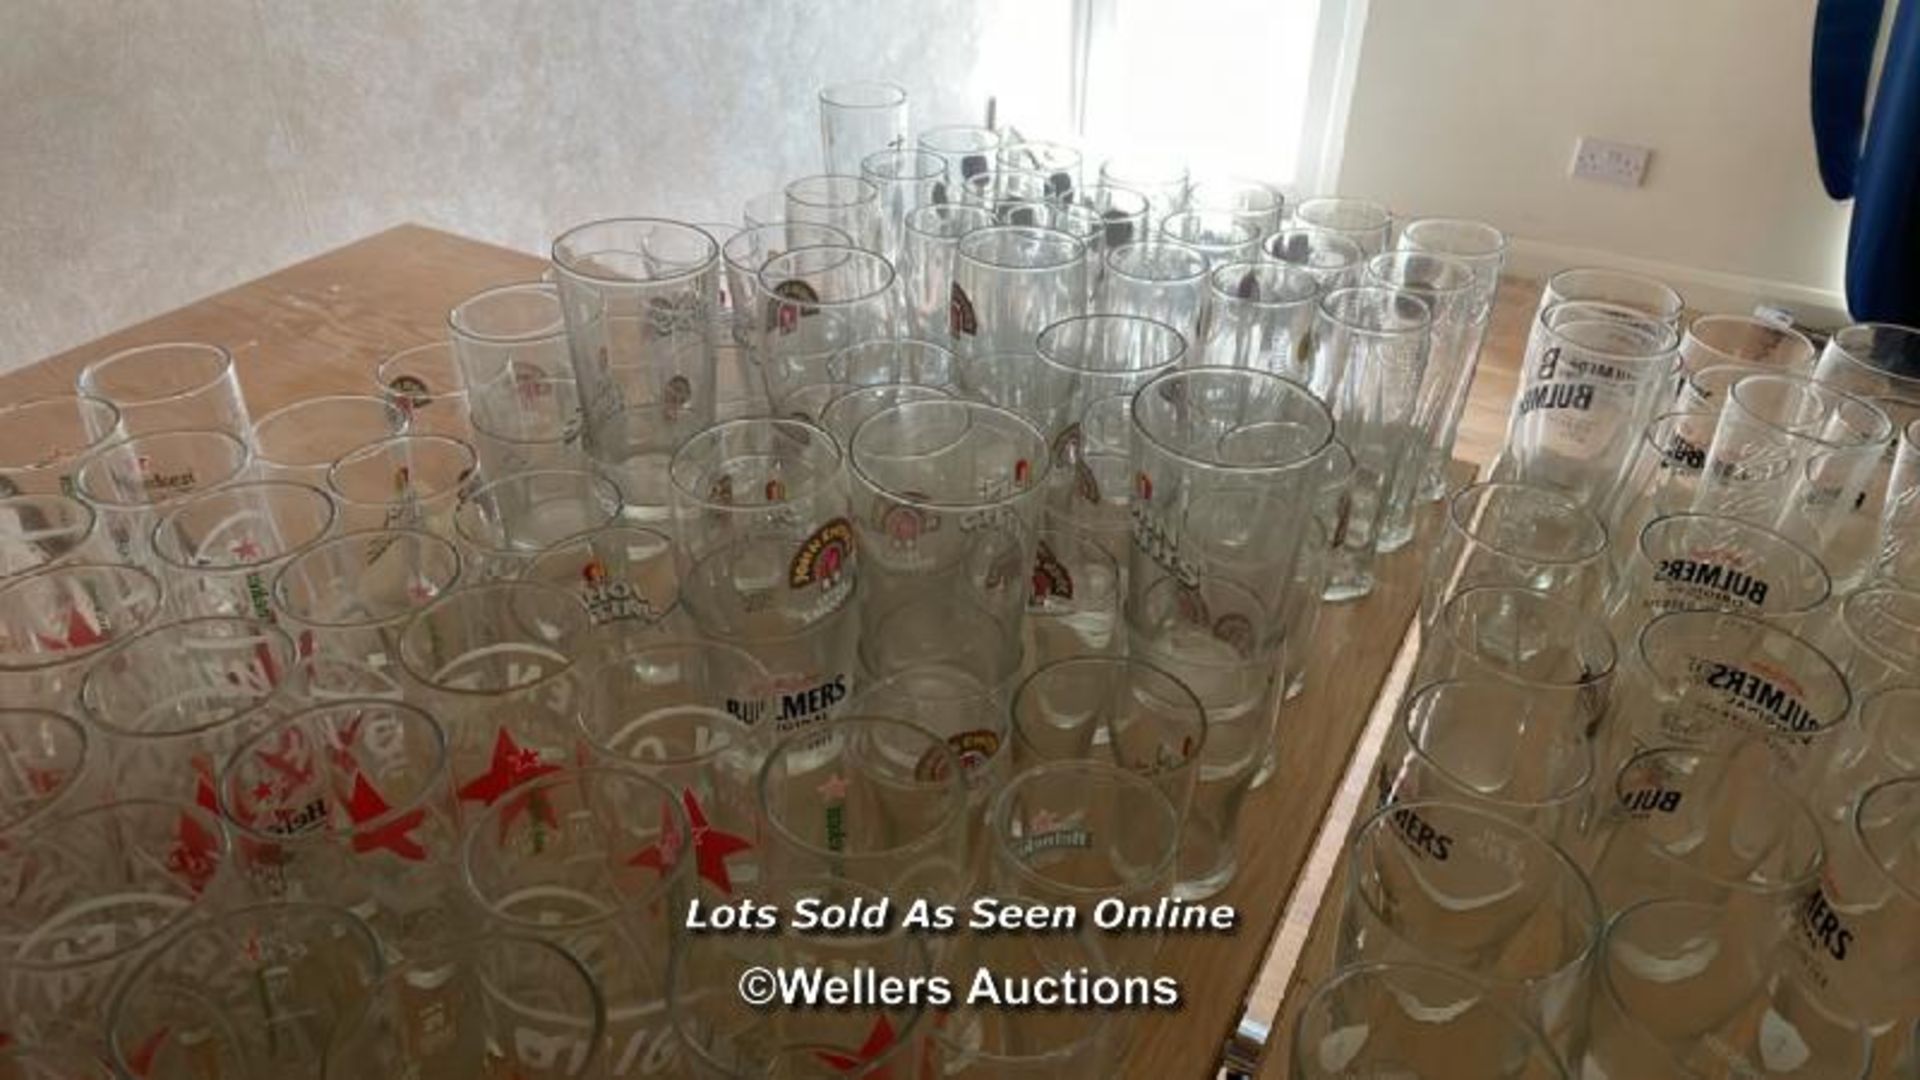 APPROX. 200X PINT GLASSES INCL. GUINNESS, HEINEKEN, BULMERS, JOHN SMITH'S AND MORE / COLLECTION - Image 3 of 6